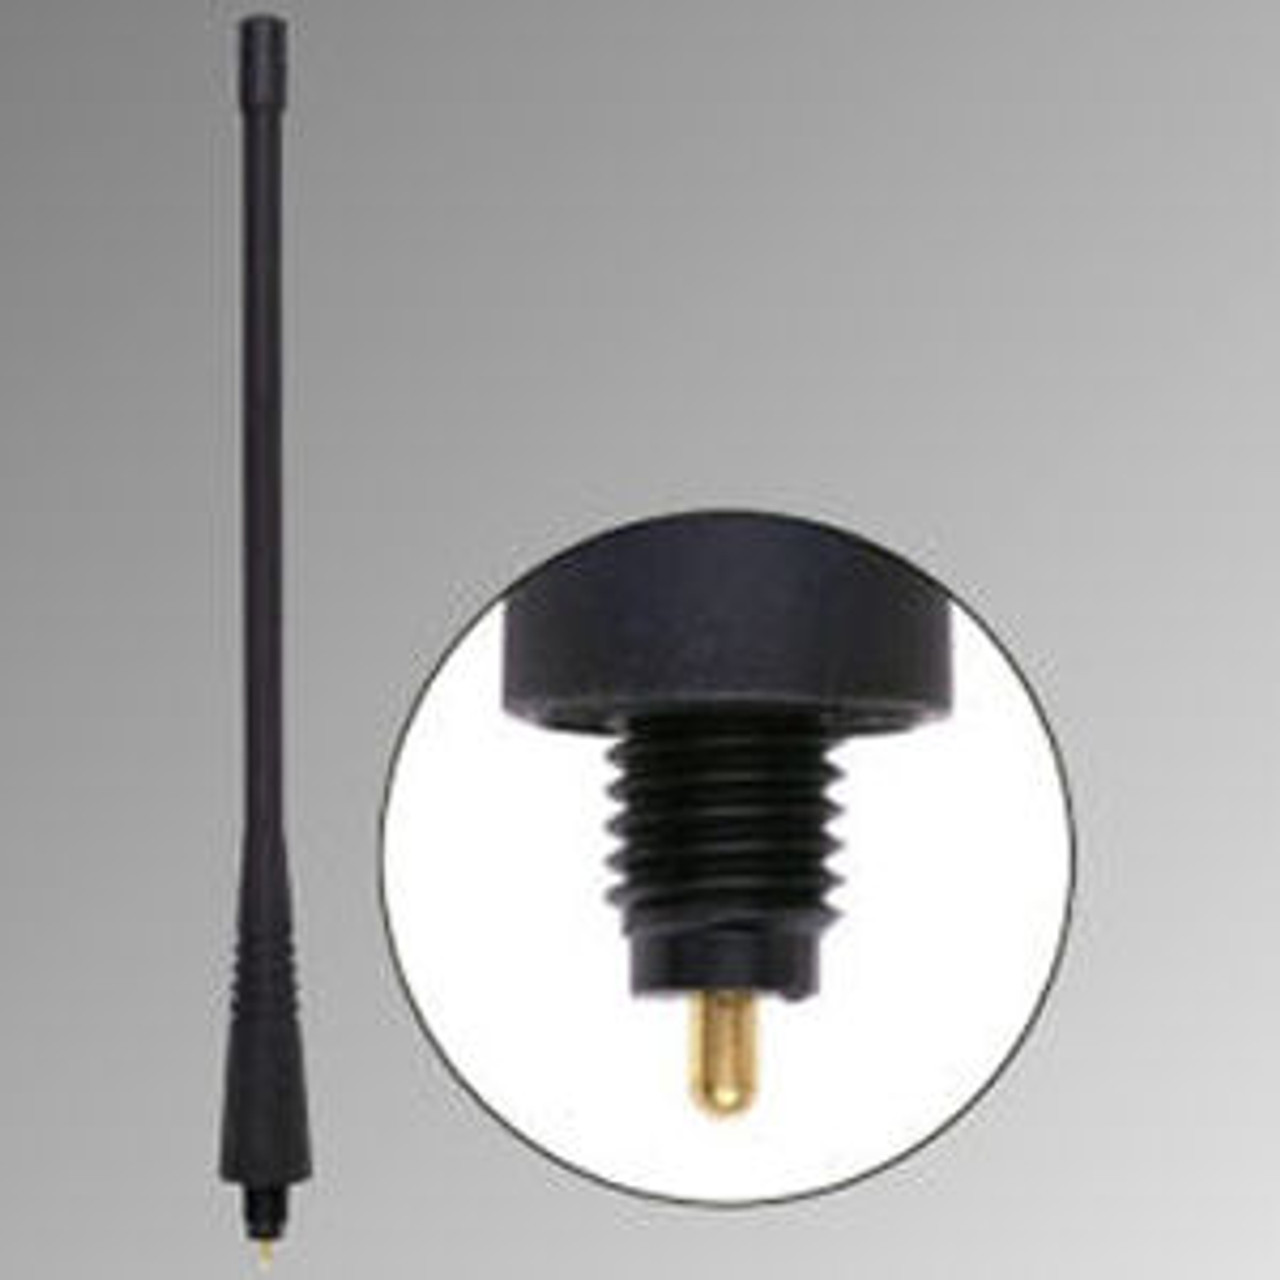 Replacement For M/A-Com HTNC1N Antenna - 6", UHF, 450-470 MHz